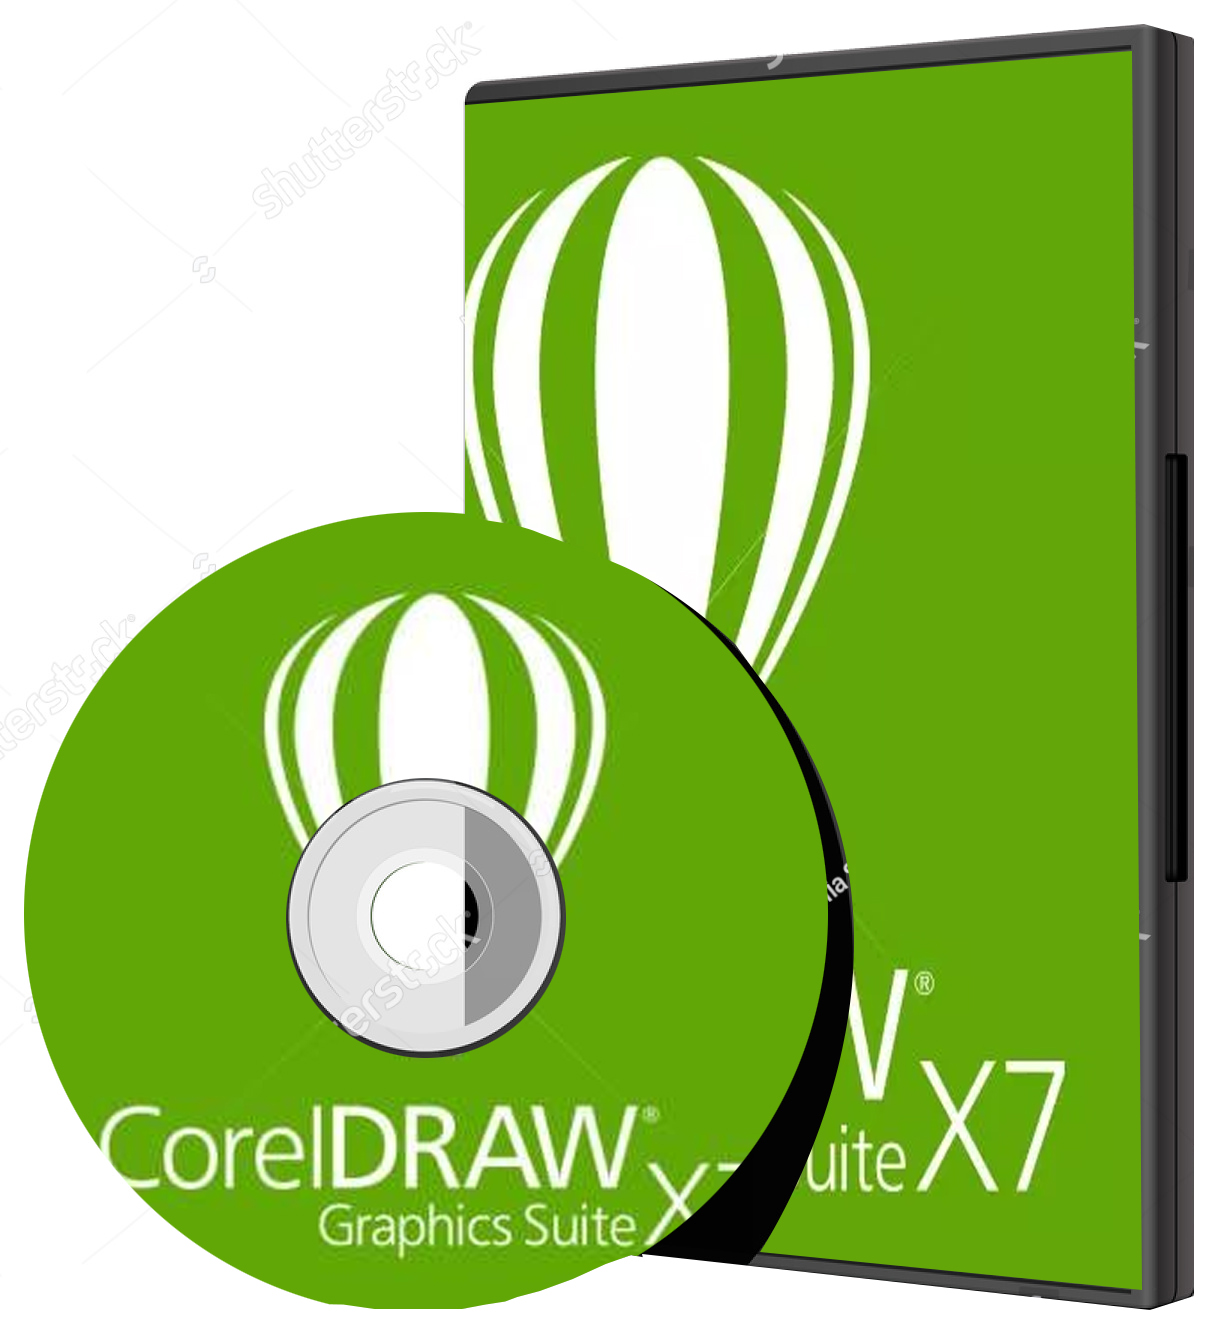 coreldraw x7 free download full version with crack for mac